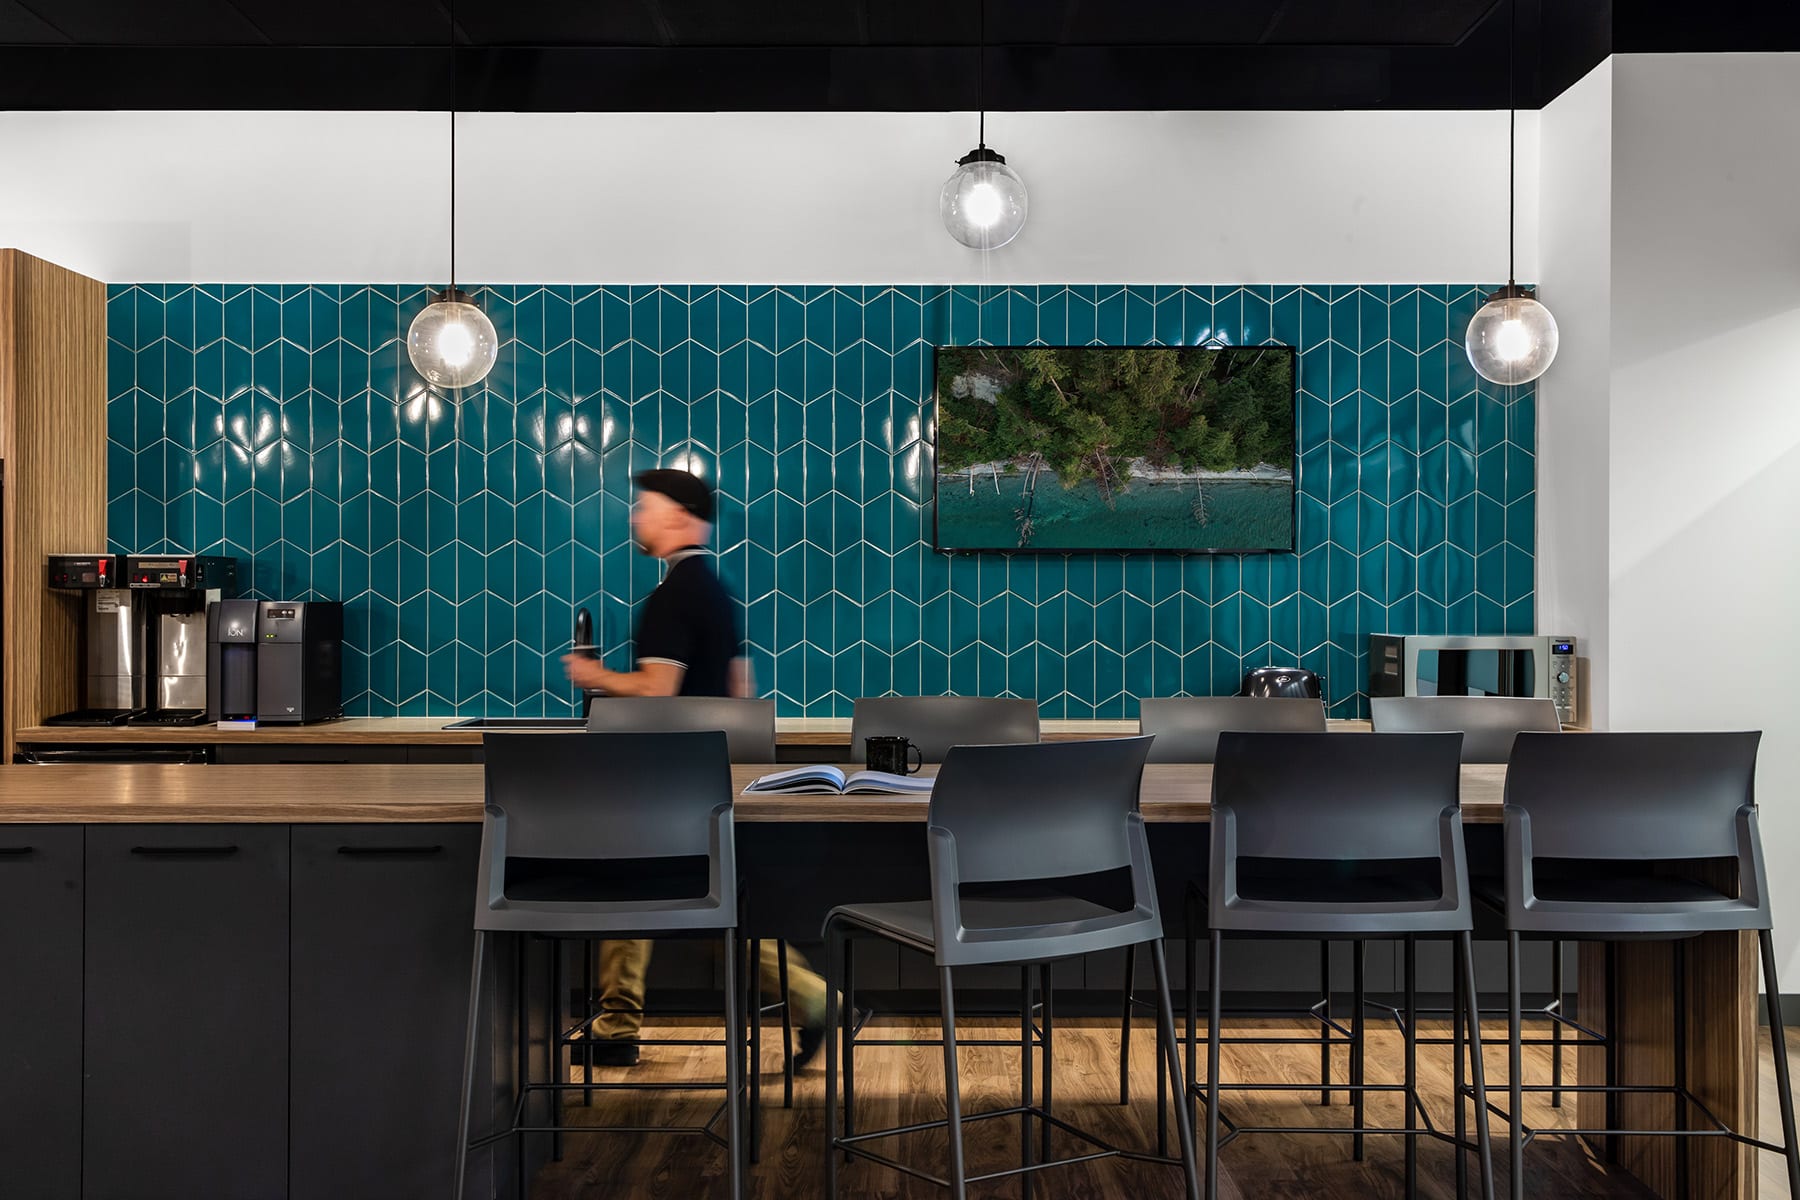 Newly constructed modern staff lunchroom. Turquoise kitchen tiles.